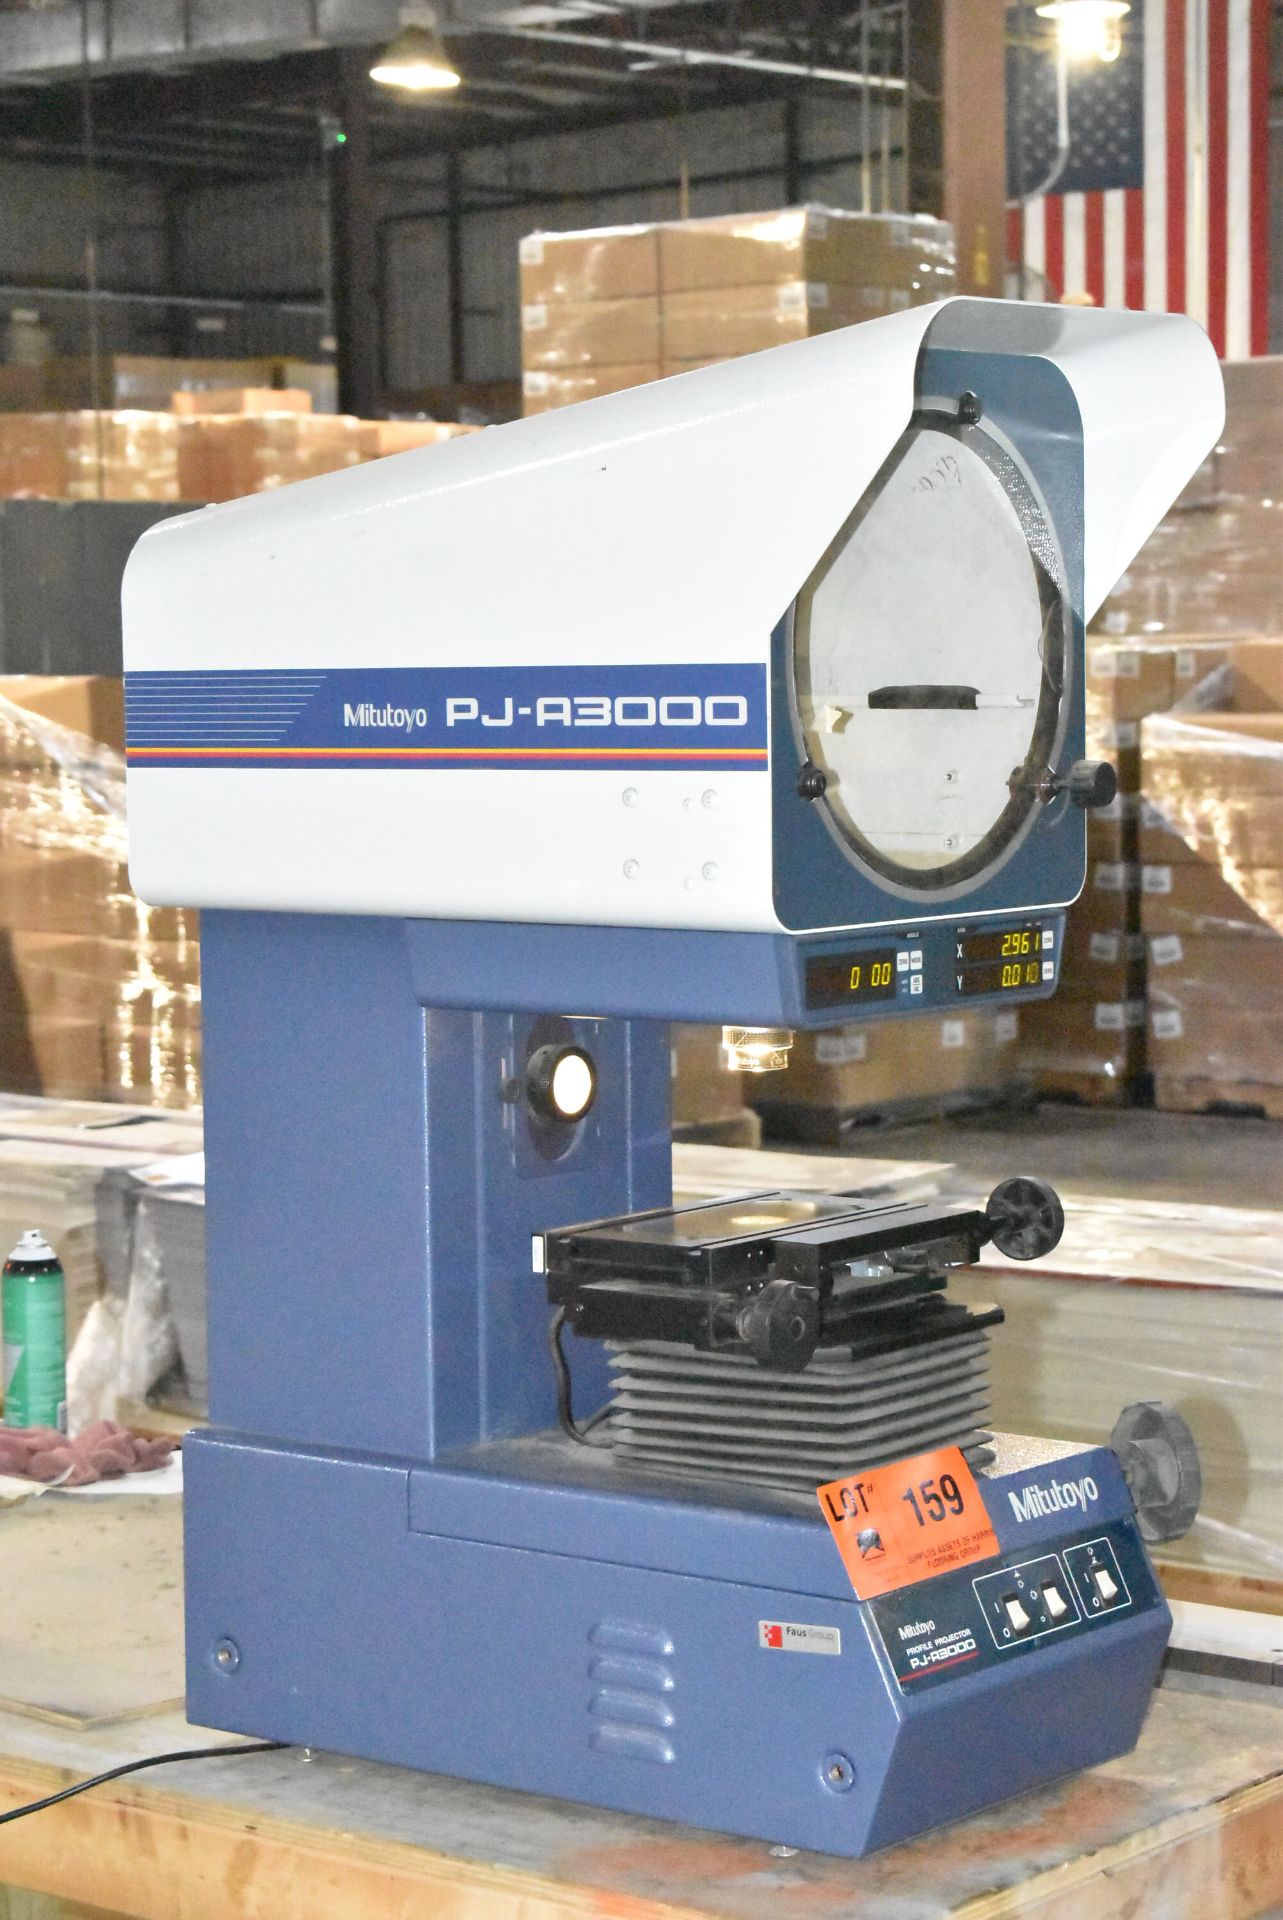 MITUTOYO PJ-A3000 13.5" OPTICAL COMPARATOR WITH BUILT IN 2-AXIS DRO, S/N: 360110 - Image 2 of 8